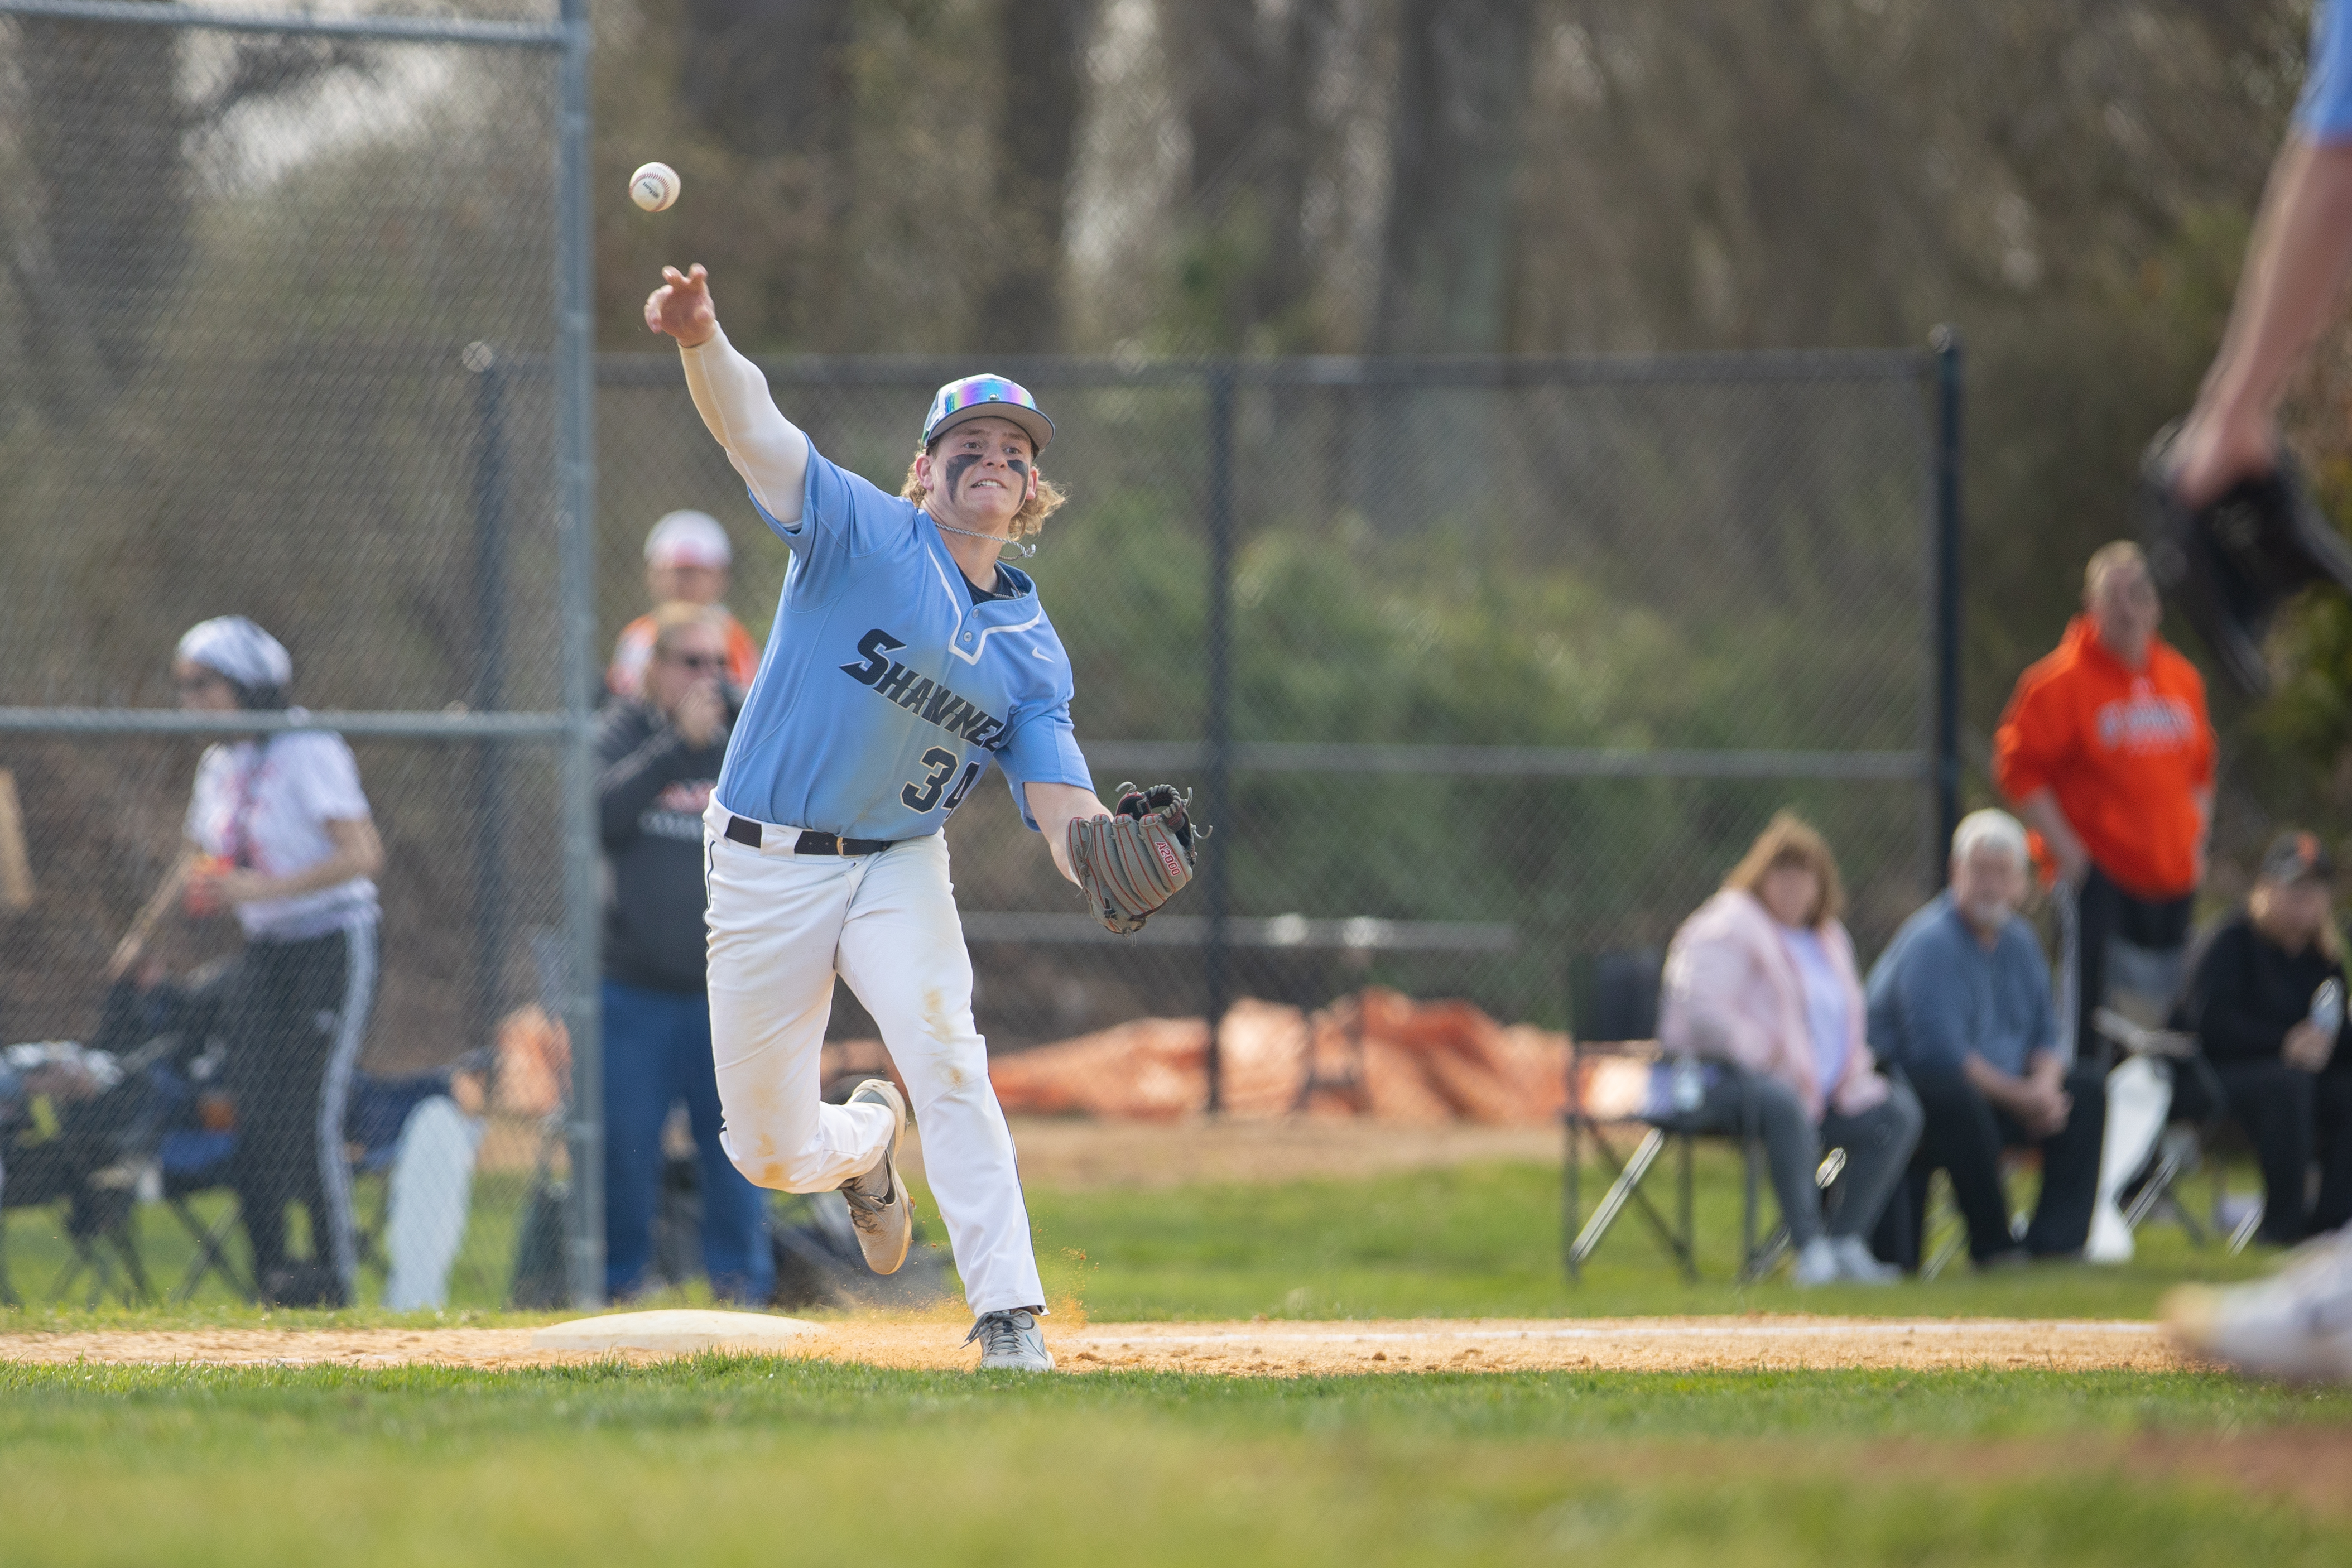 Michael Pierson (34) of Shawnee, throws to first in Marlton, NJ on Monday, April 3, 2023.